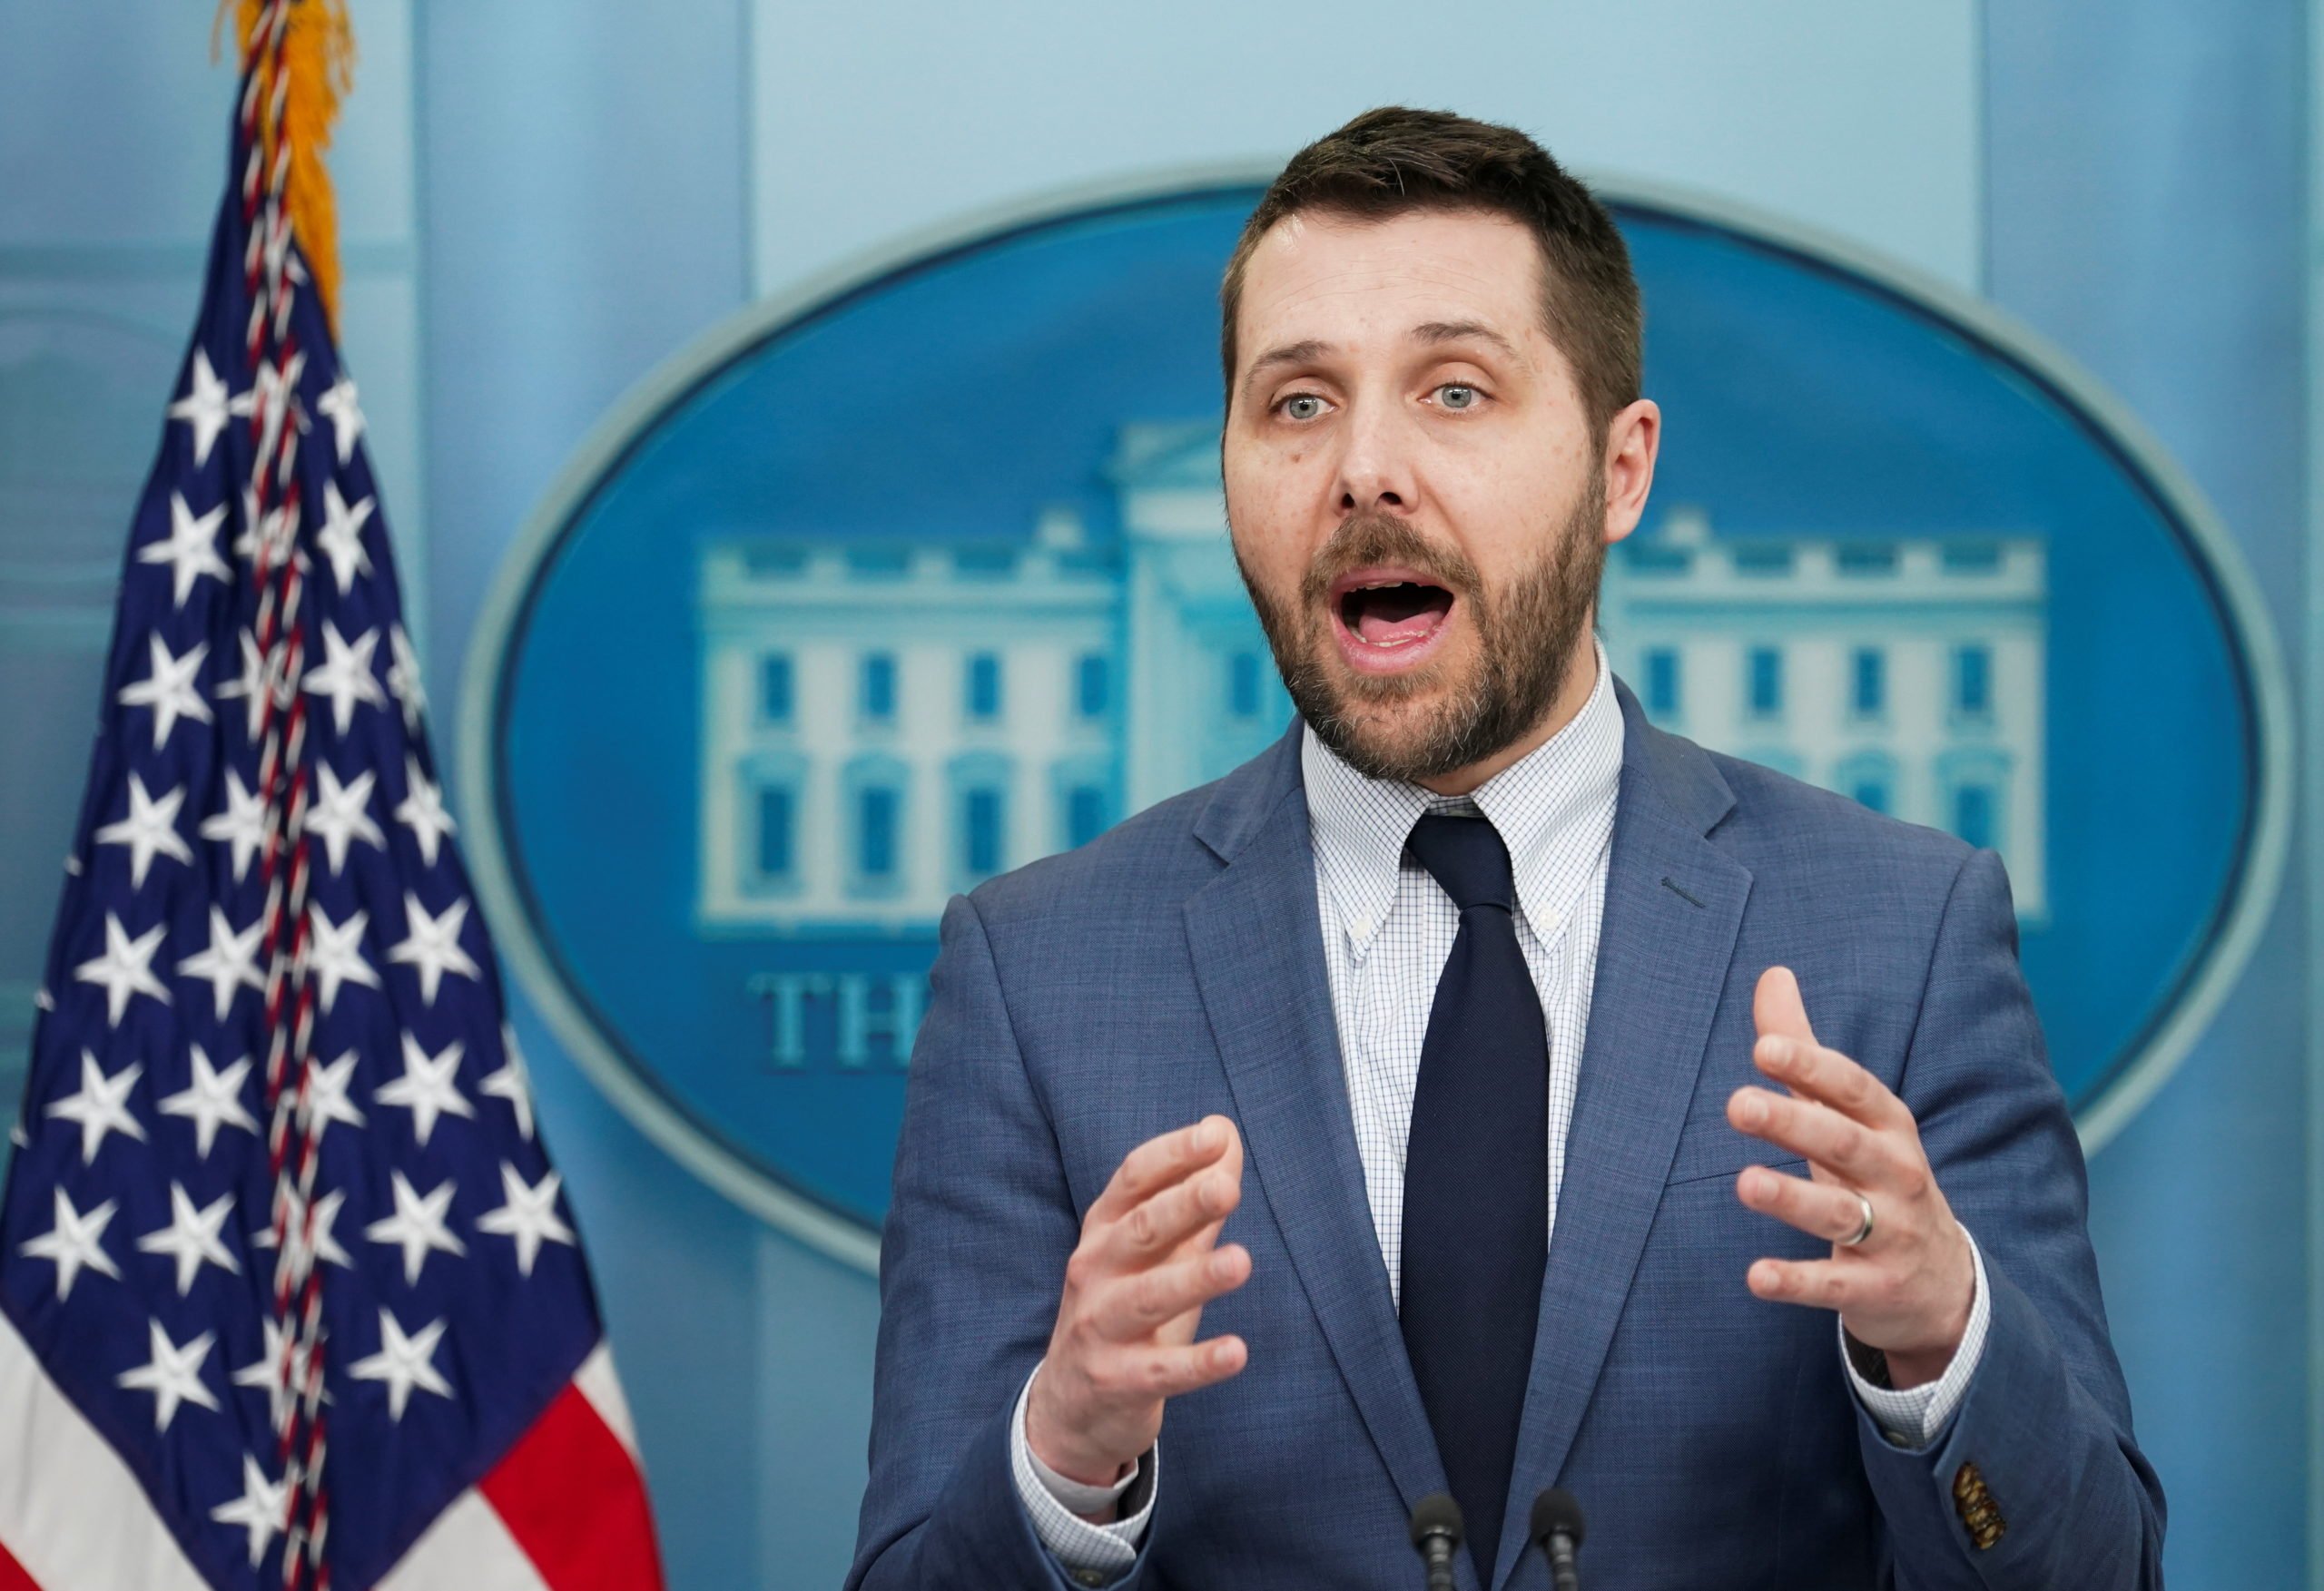 FILE PHOTO: White House economic adviser Brian Deese speaks during a press briefing at the White House in Washington, U.S., March 31, 2022. REUTERS/Kevin Lamarque